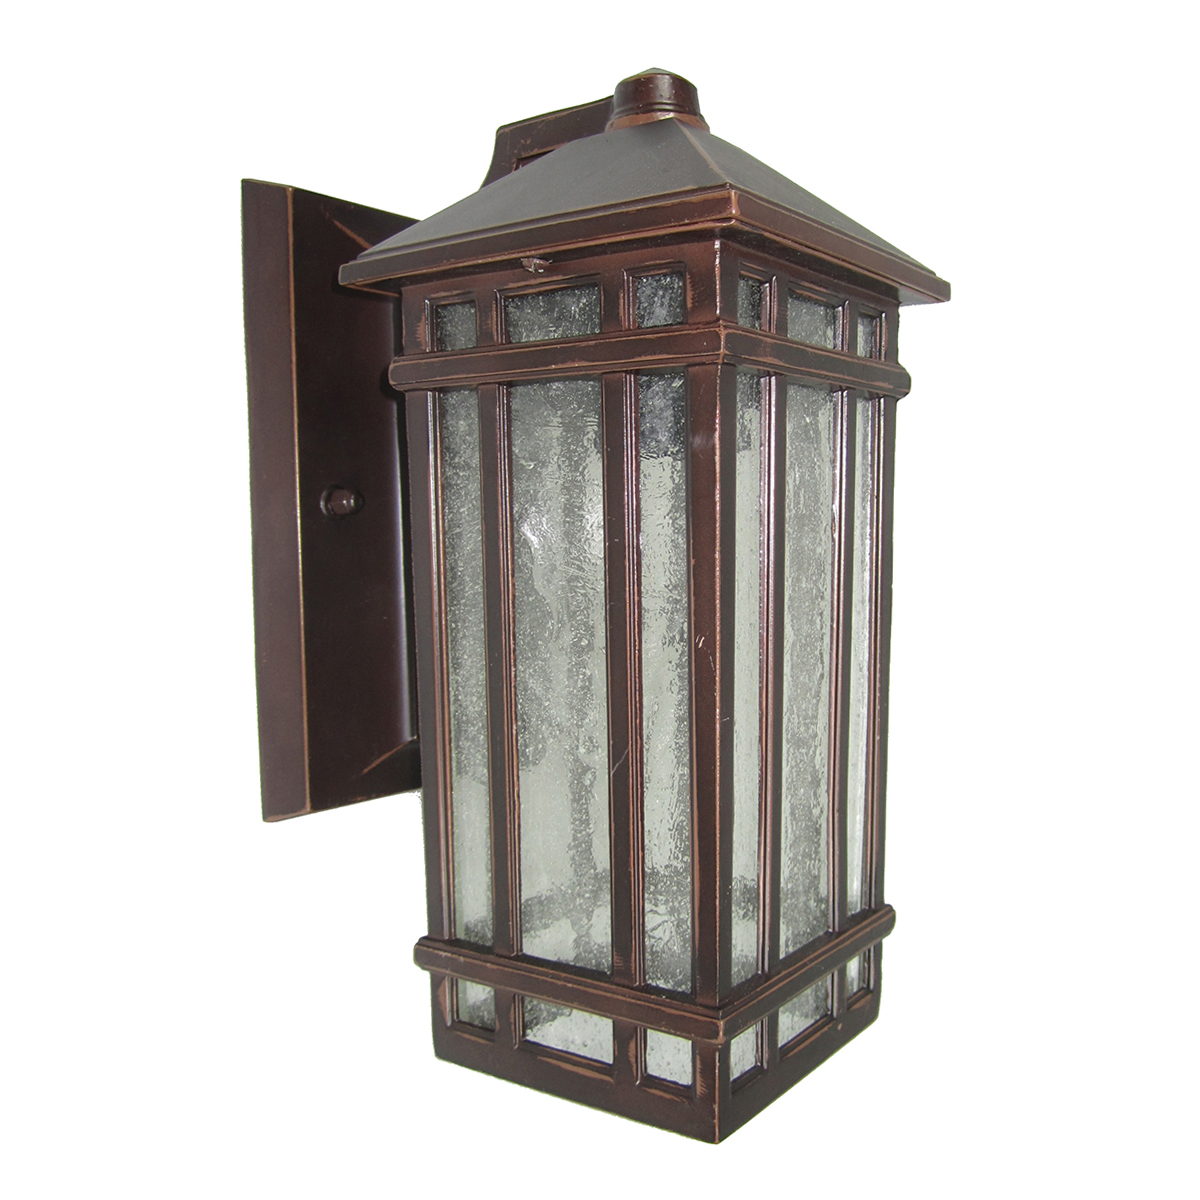 CHEDWORTH old bronze GZH-CHW2 Elstead Lighting